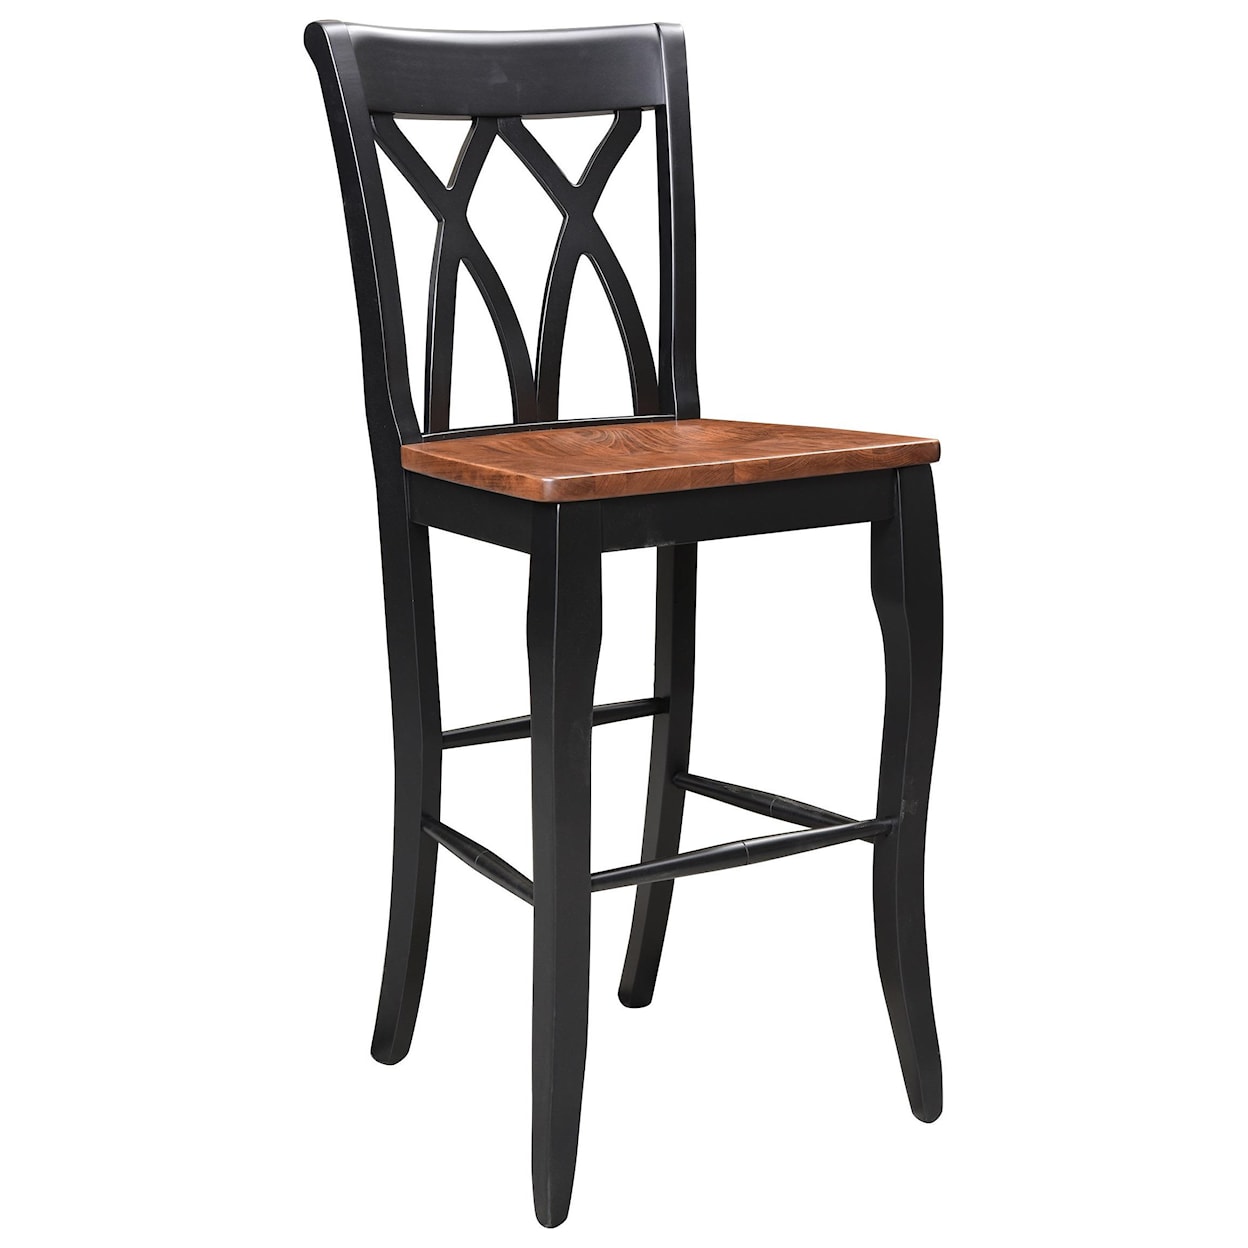 Wengerd Wood Products Stanton 30" Stationary Stool